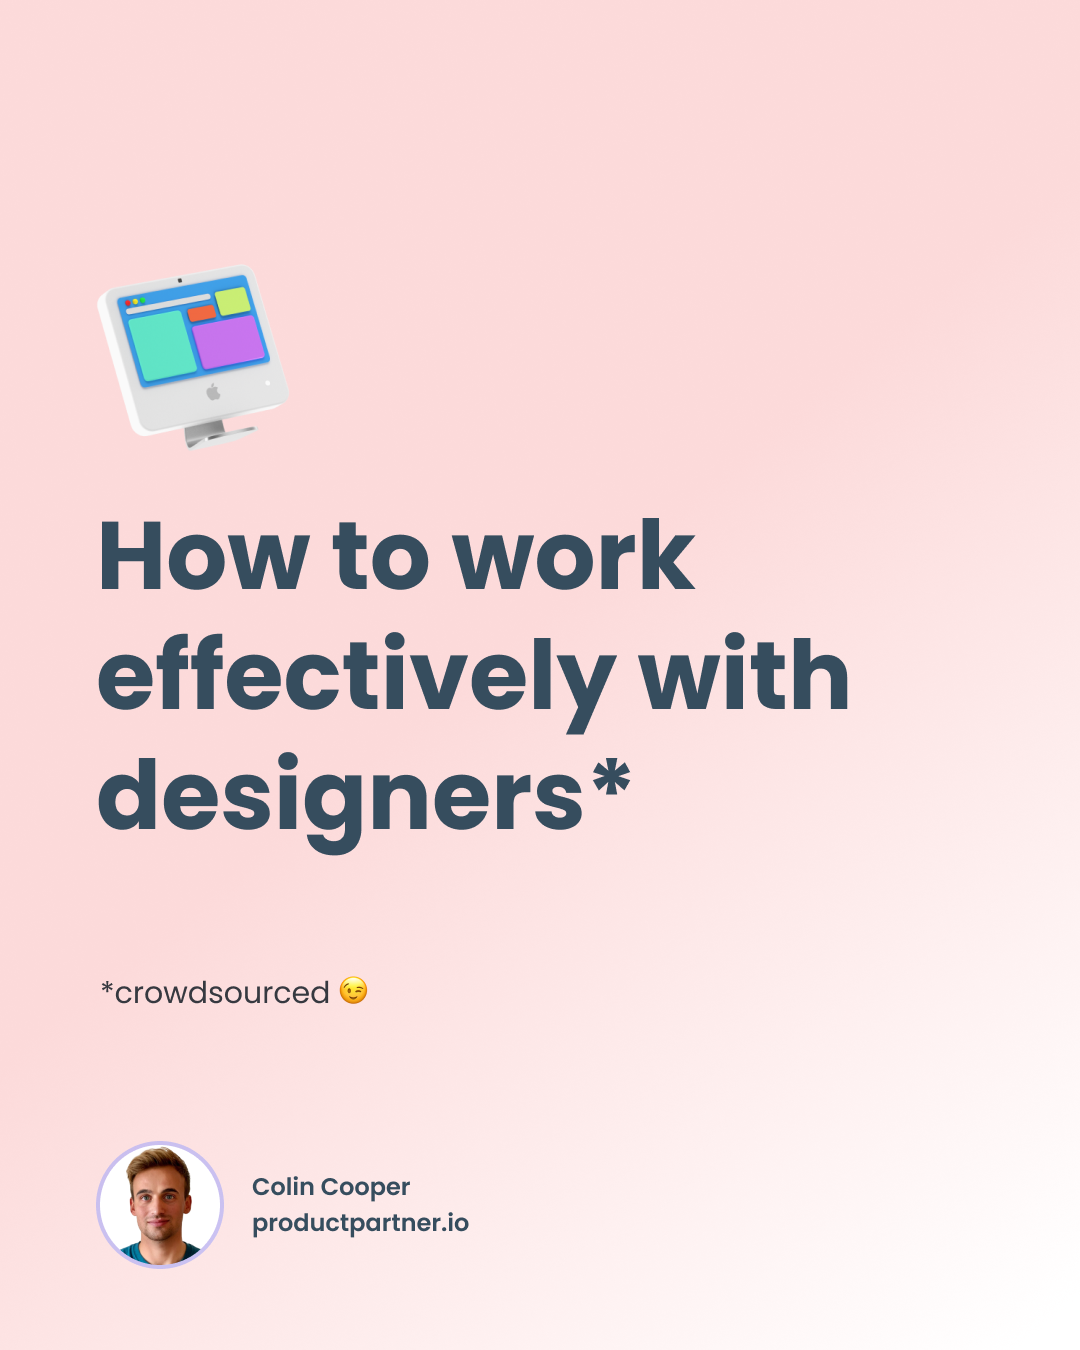 How to work effectively with designers